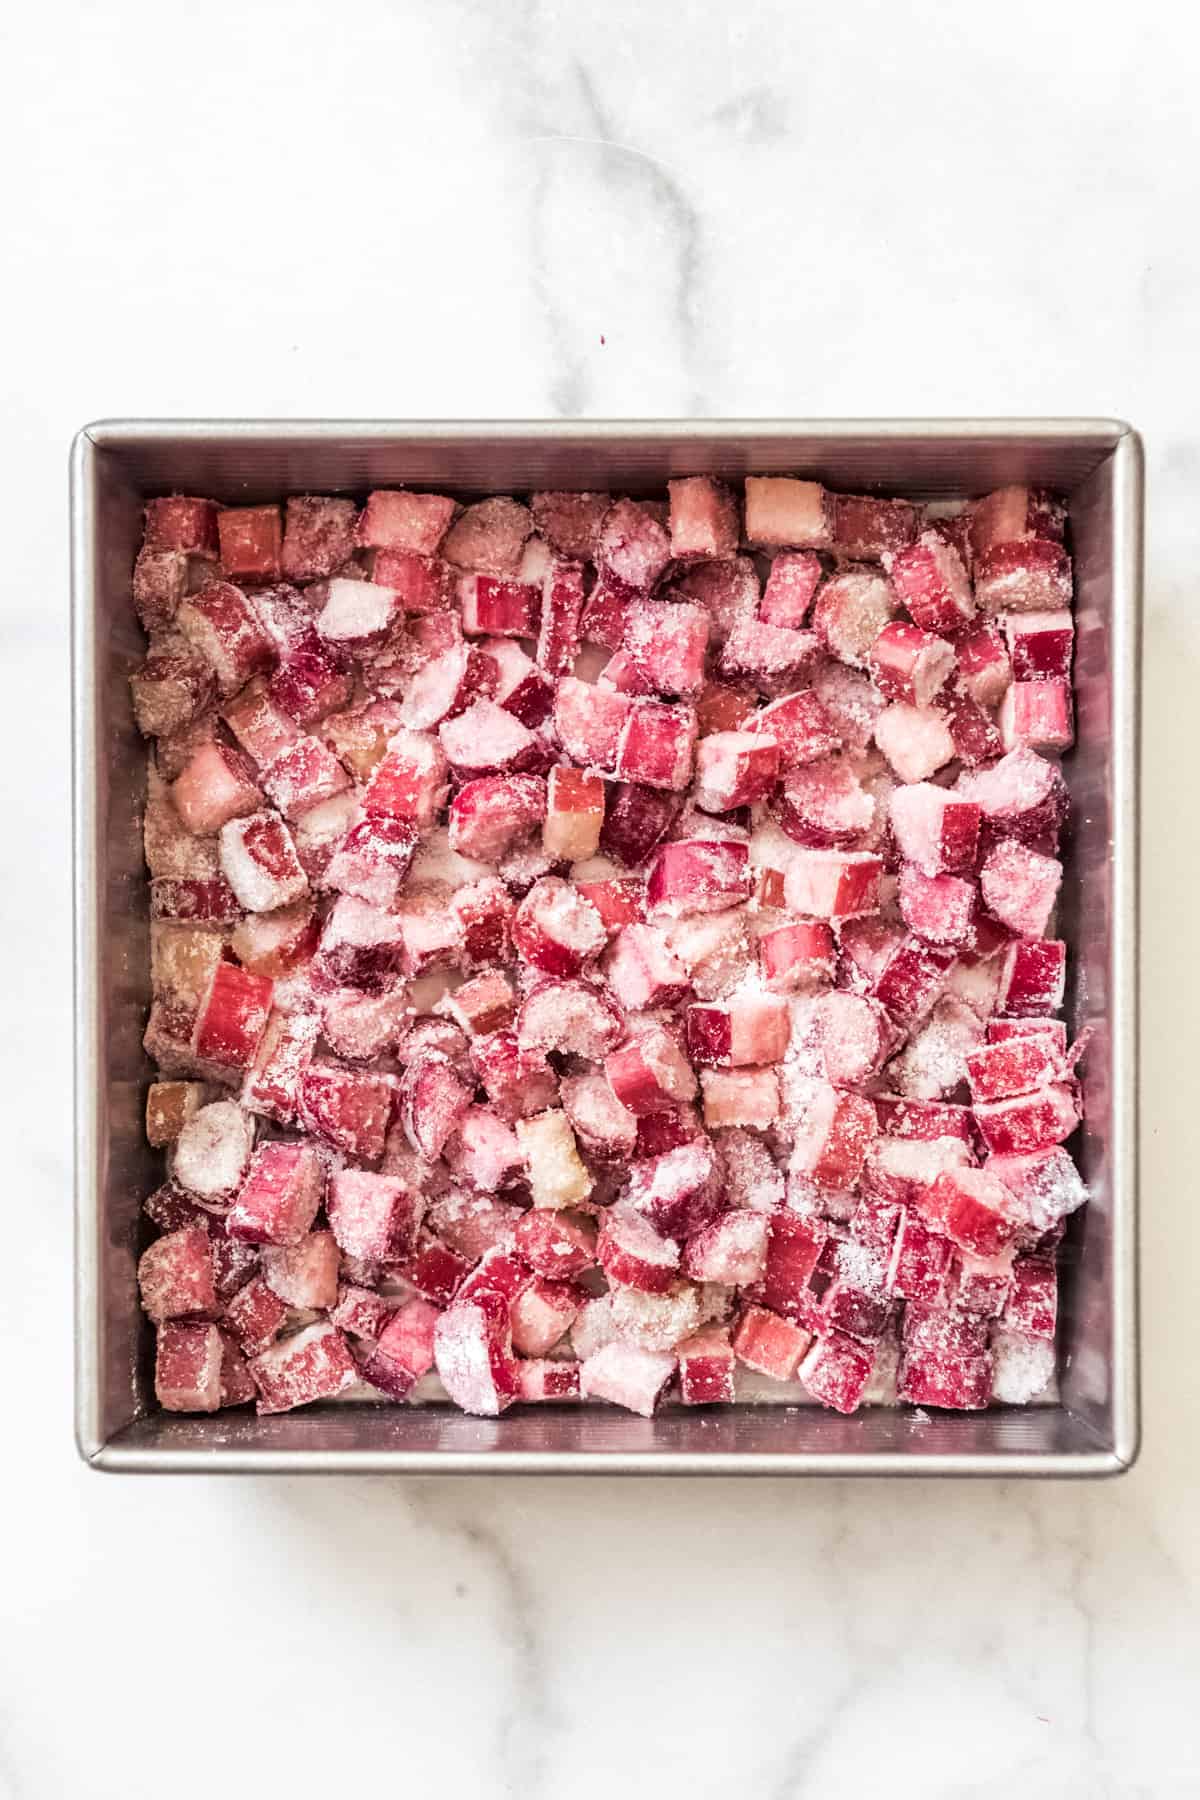 a baking dish full of flour coated rhubarb slices